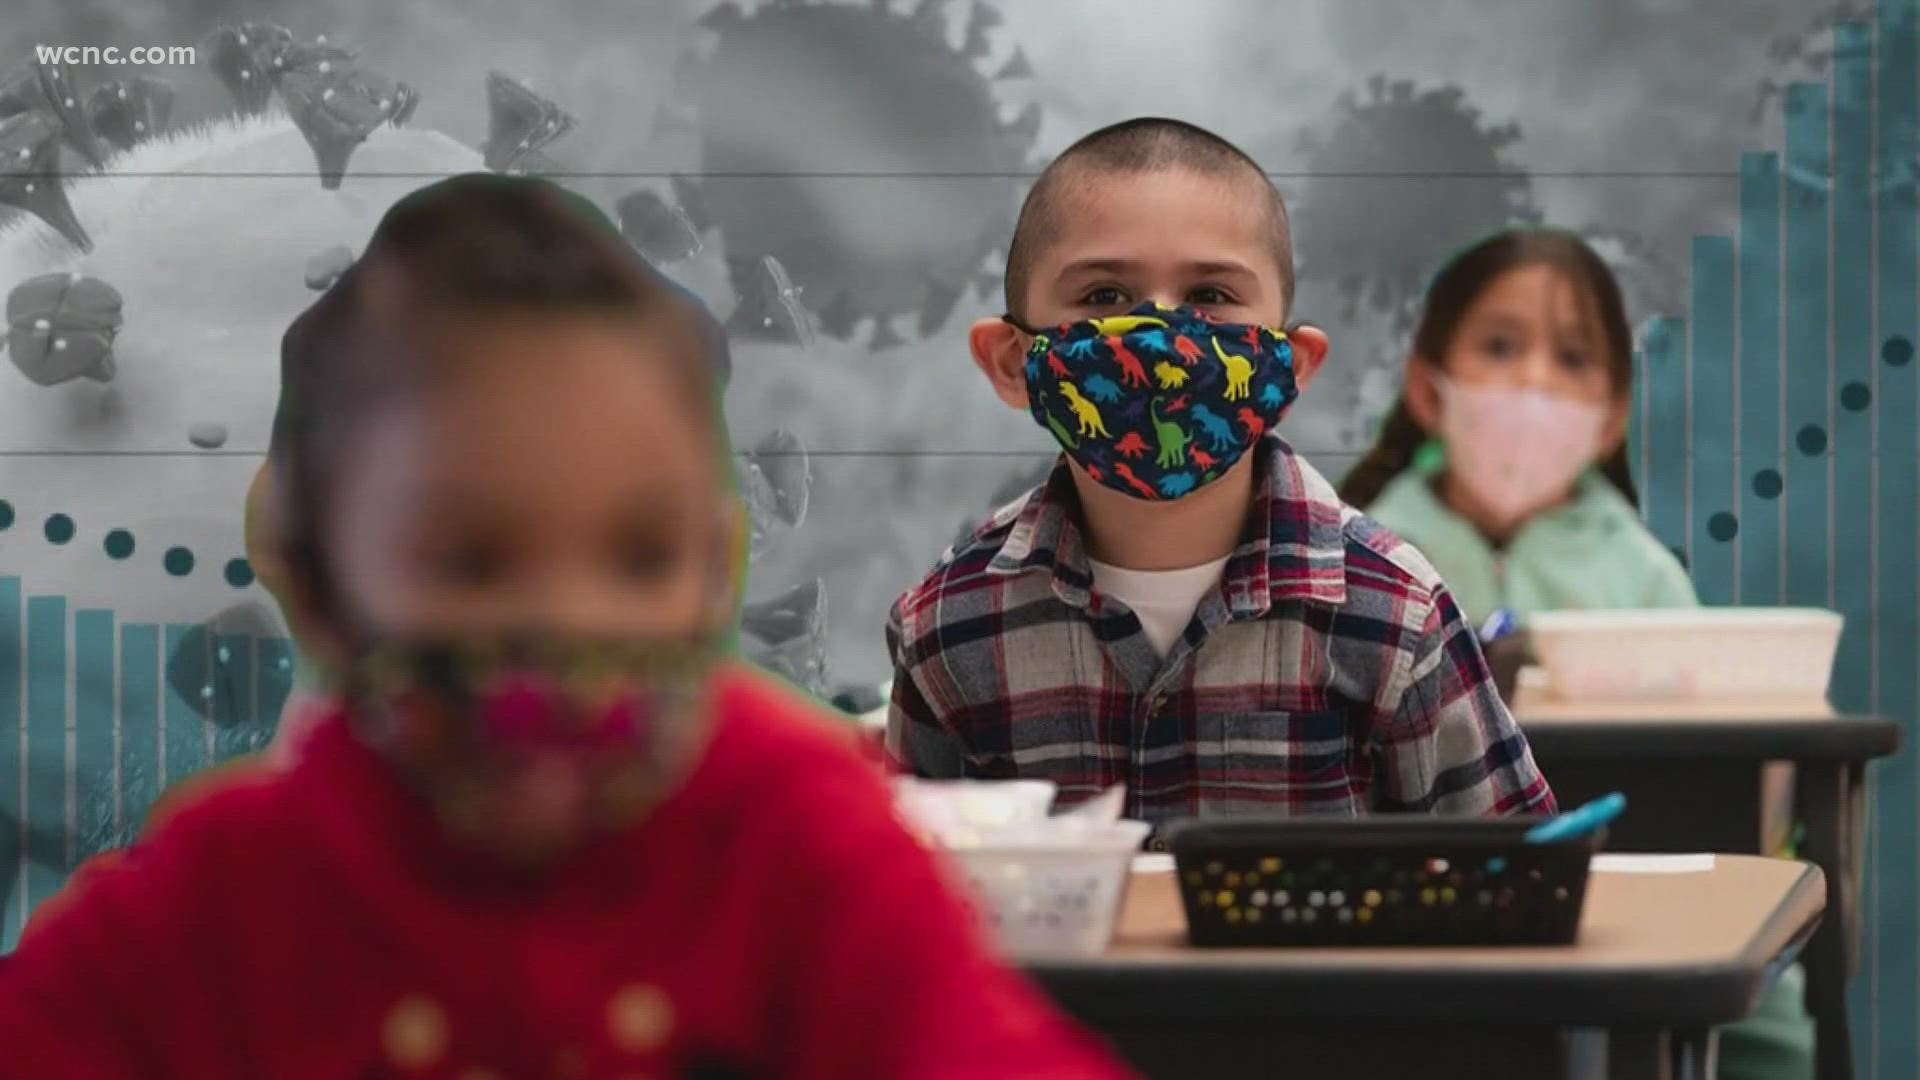 Schools in South Carolina are now allowed to mandate masks after last week's ruling from a federal judge.